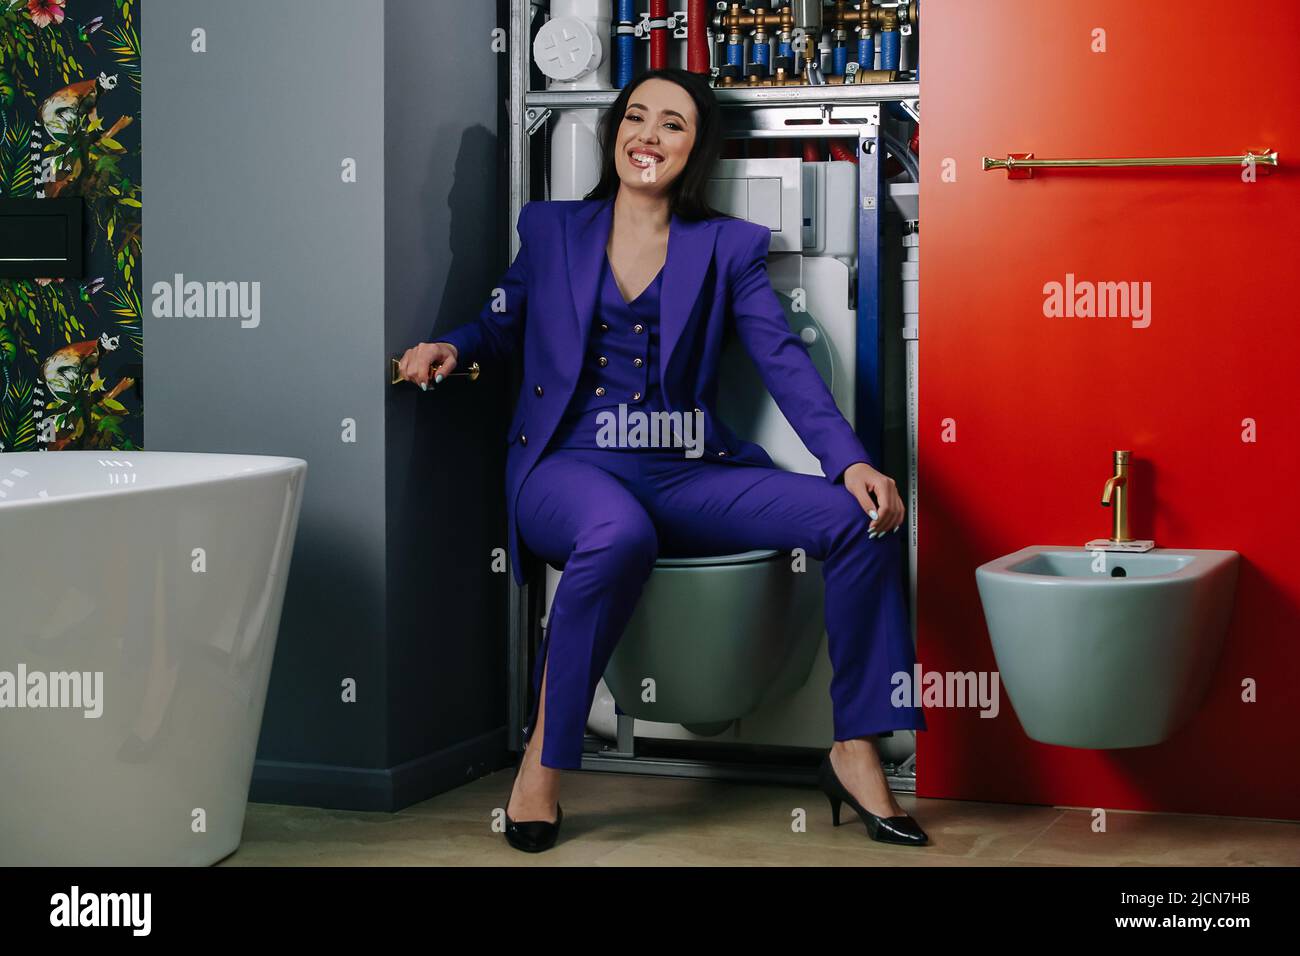 Giggling, sitting on a toilet saleswoman presenting plumbing options Stock Photo